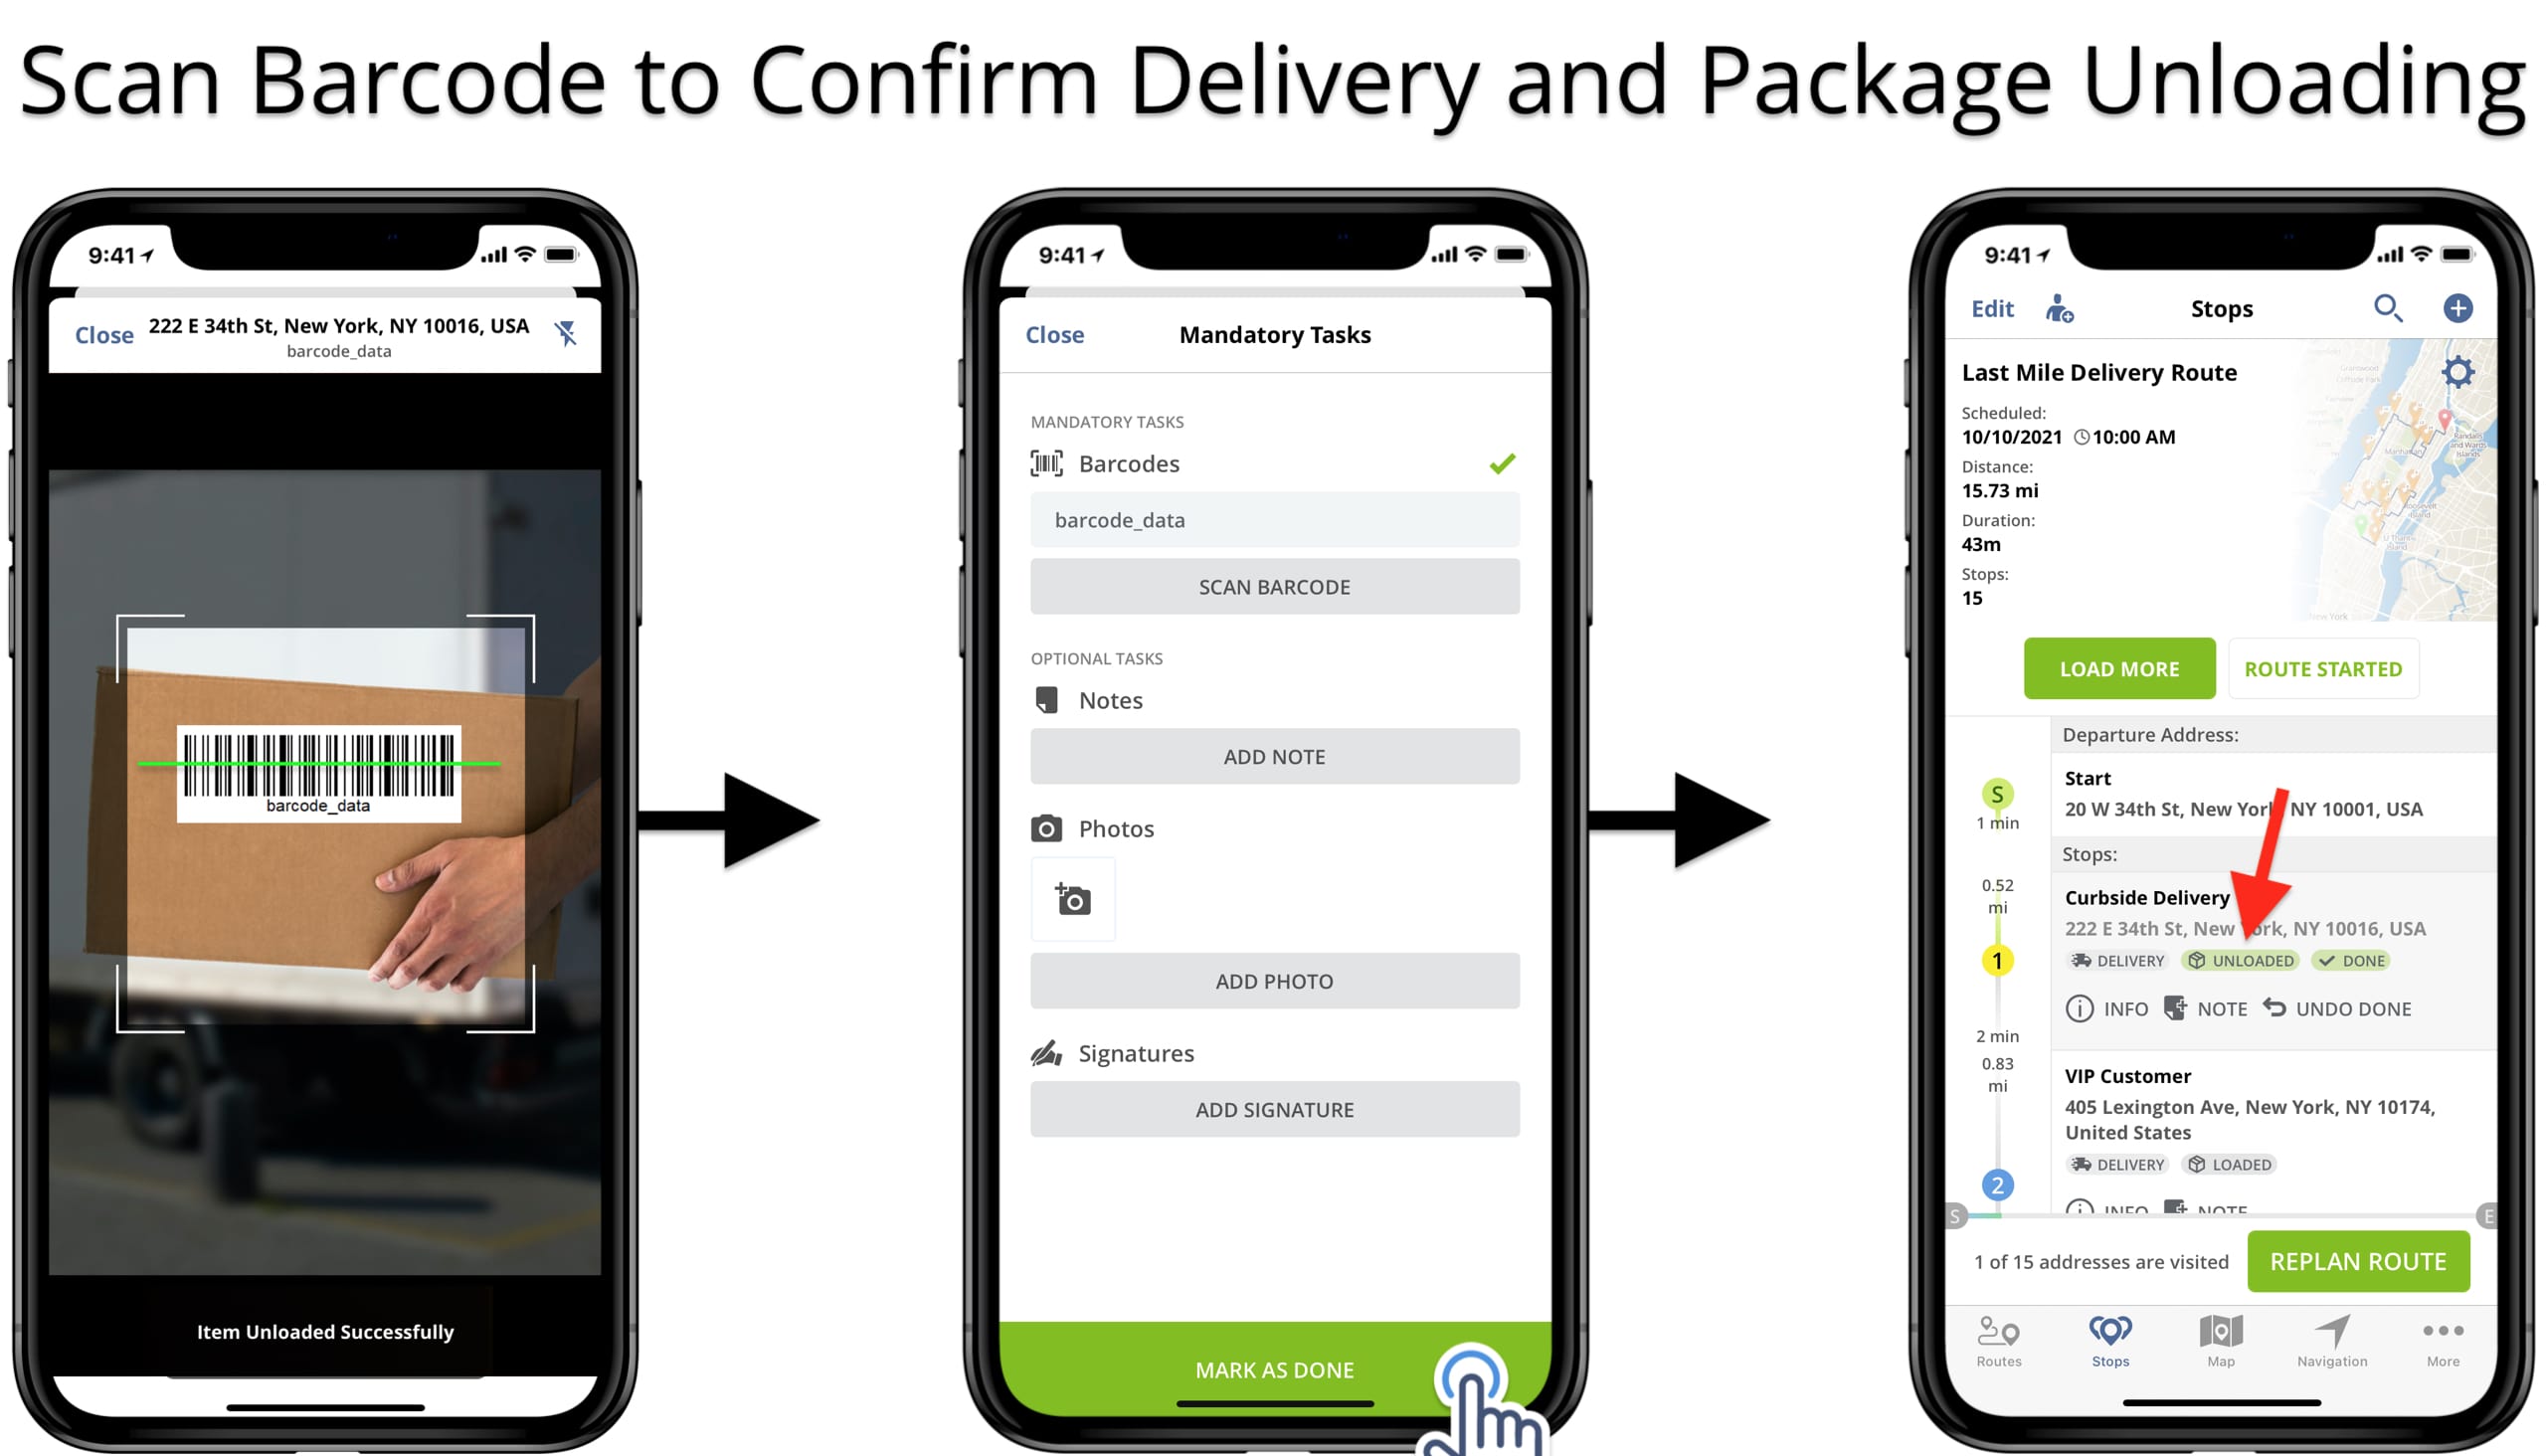 Scan QR Code or barcode to confirm package unloading or order delivery on route planner app.